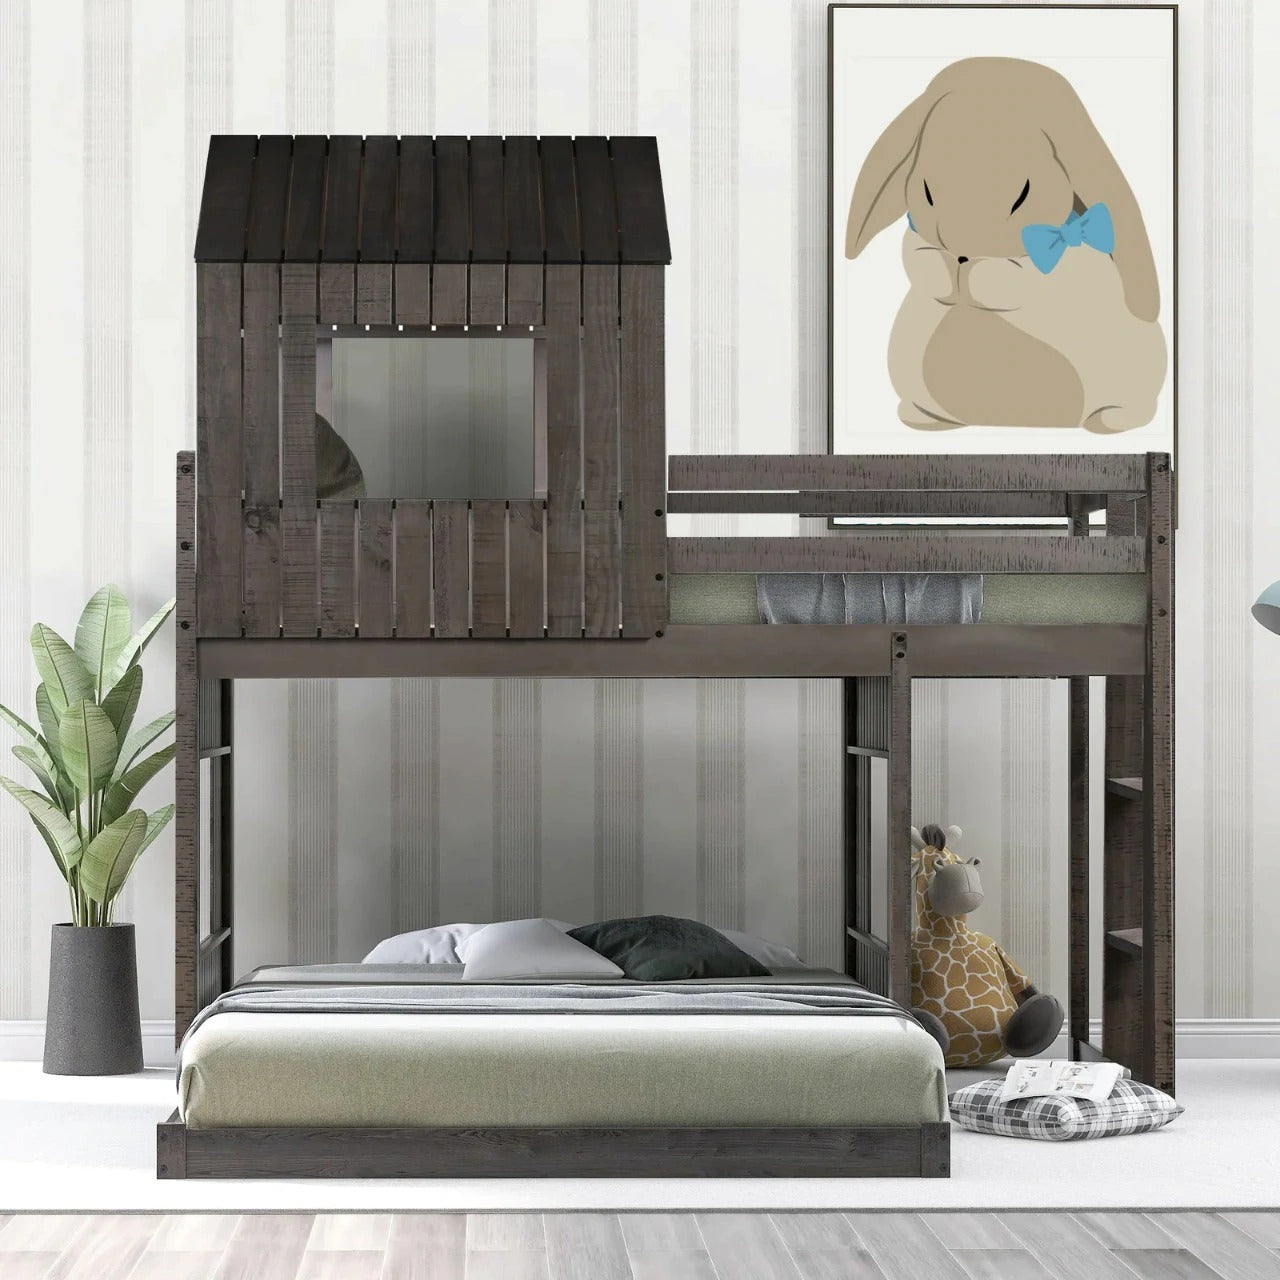 Canopy Bed, Poster Bed, Four Poster Bed, 4 Poster Bed, Poster Bed Room